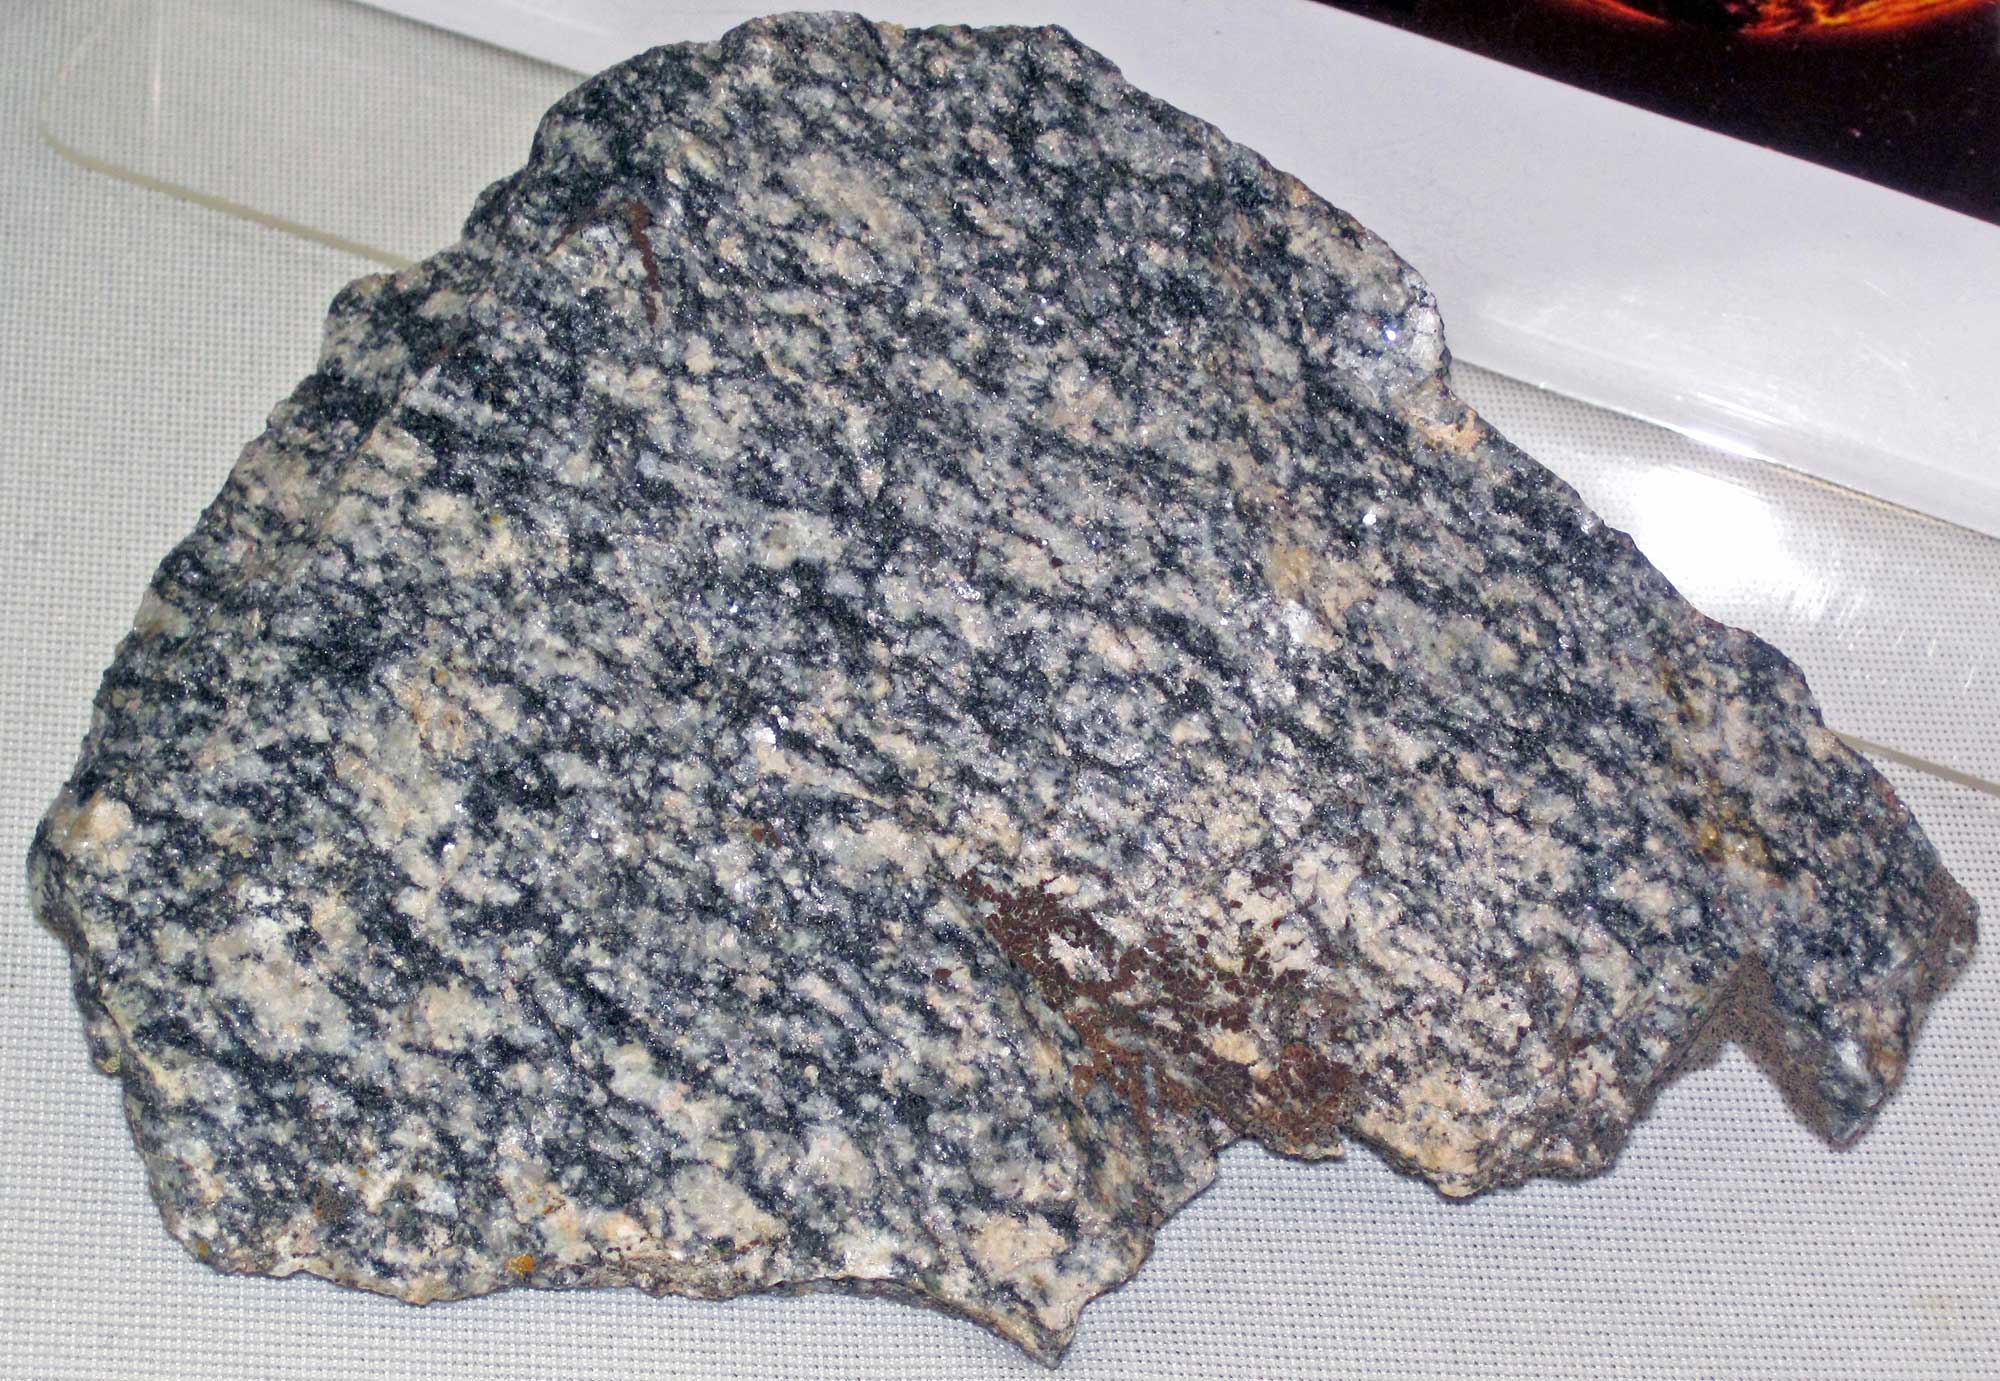 Photograph of a sample of Archean Watersmeet Gneiss from Watersmeet, Michigan. The photo shows a mottled dark gray and pinkish beige rock.